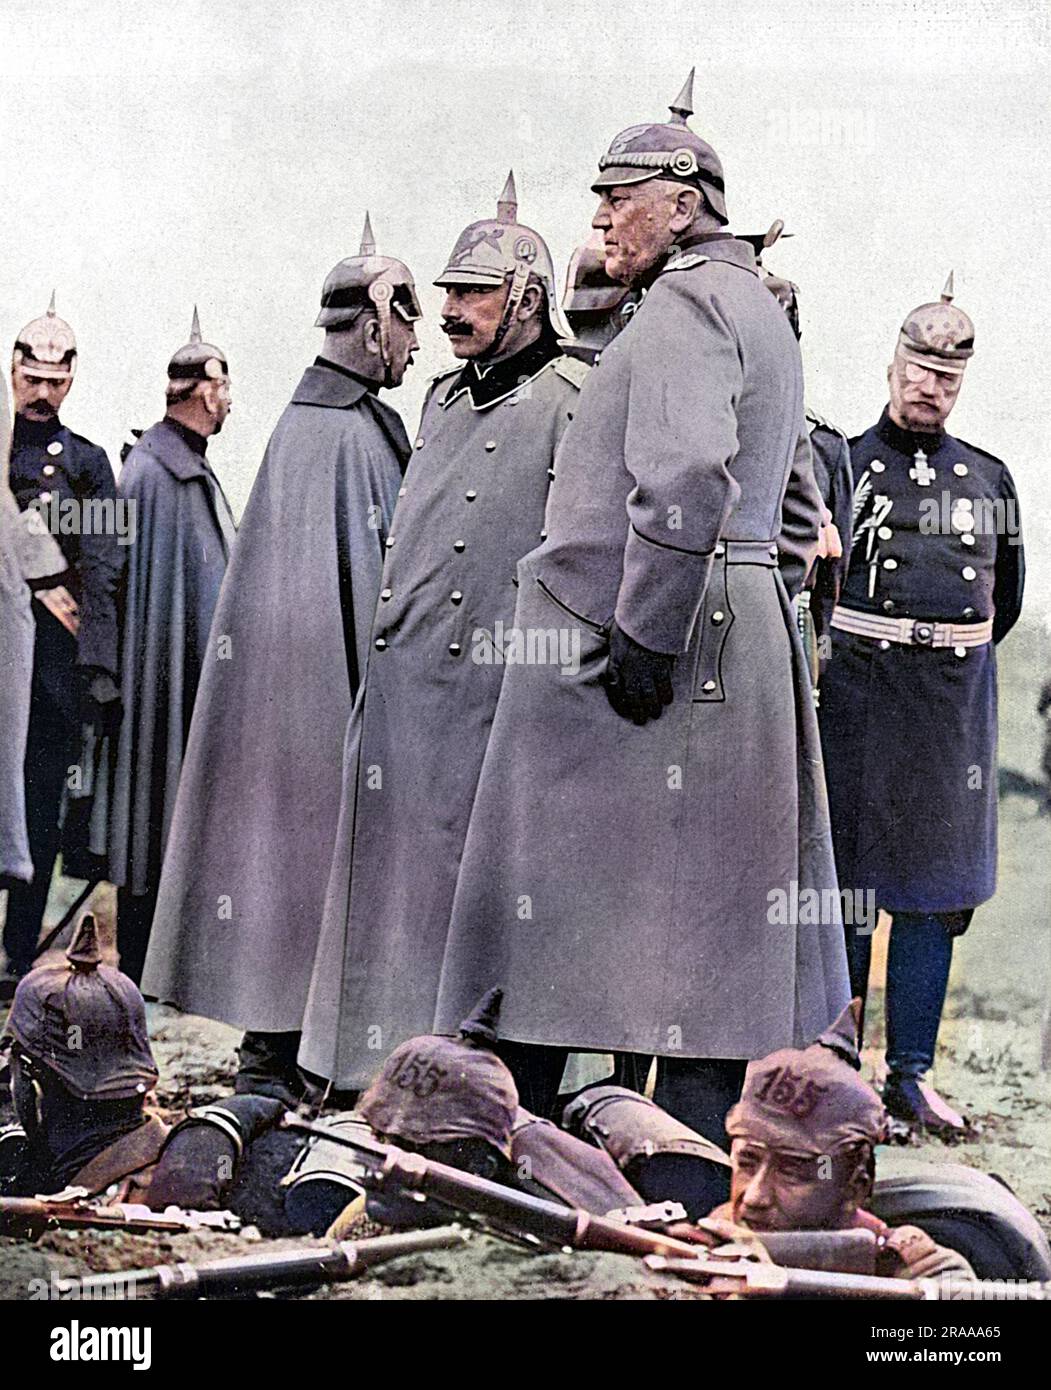 The Chief of General Staff, General Helmuth von Moltke and Kaiser Wilhelm II of Germany observing the German troops in training.     Date: 1914 Stock Photo